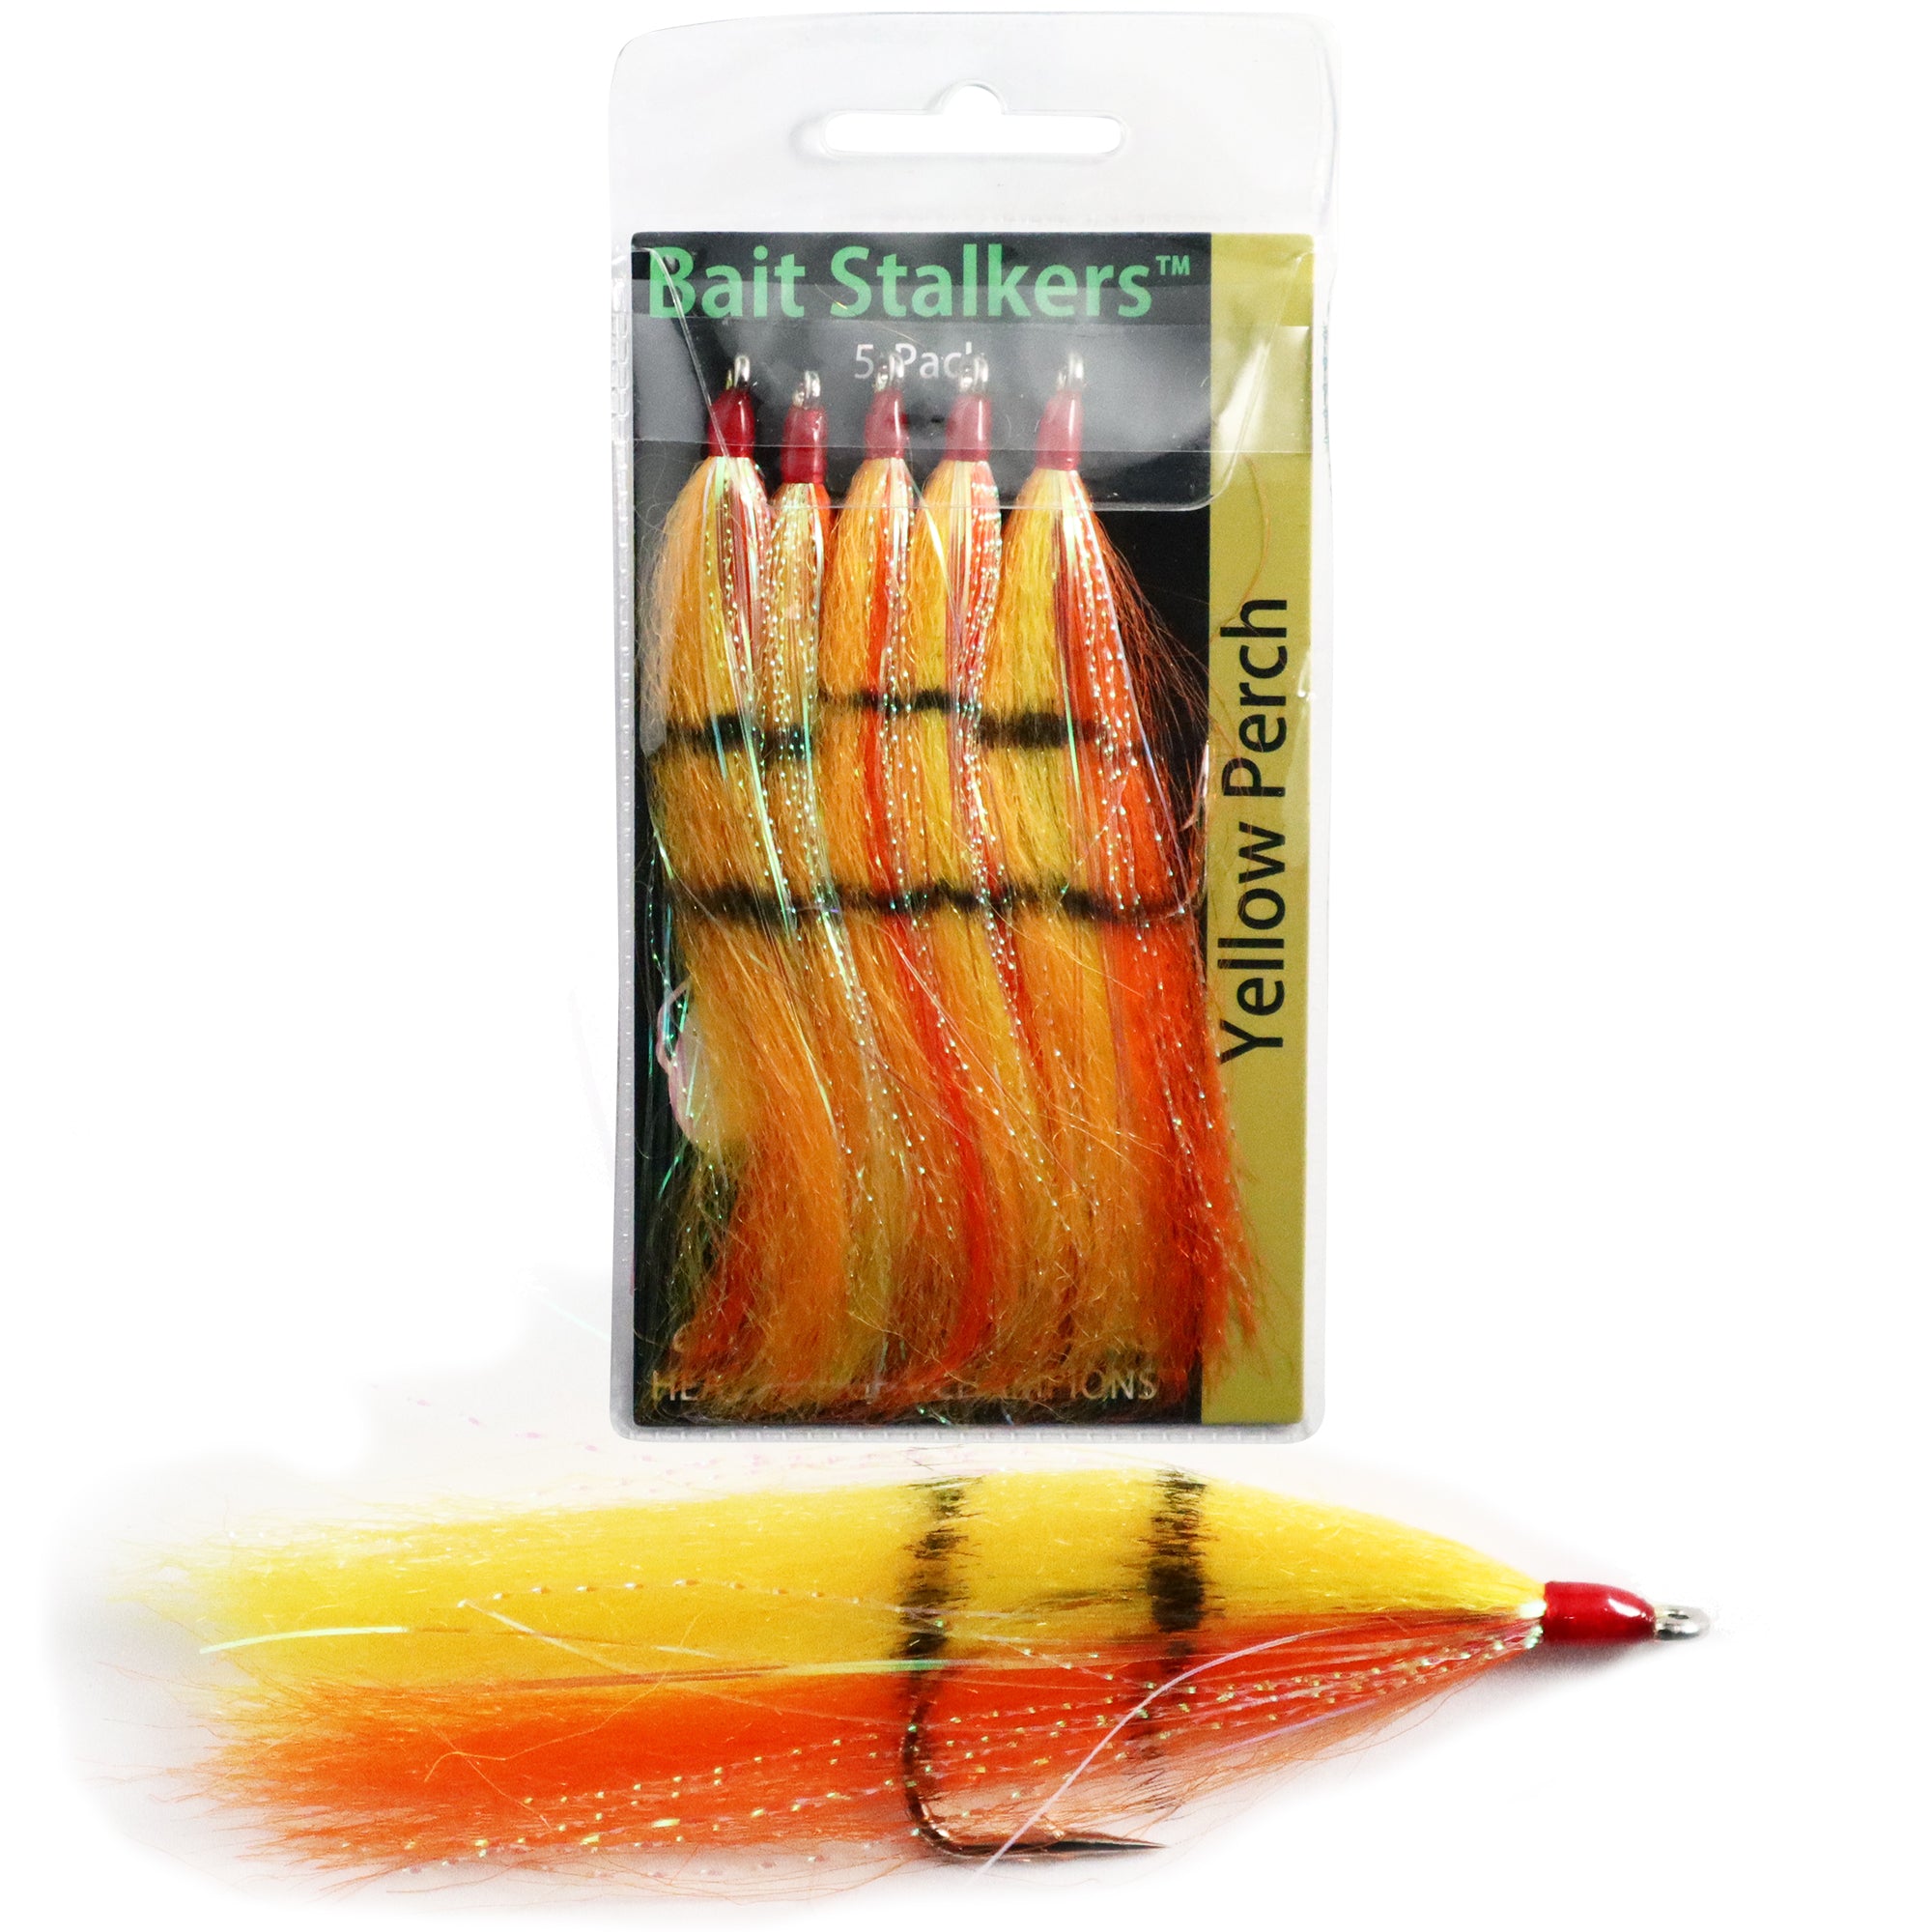 Bait Stalkers: Stinger Flies to Catch Extra Catfish, 5-Pack, Yellow